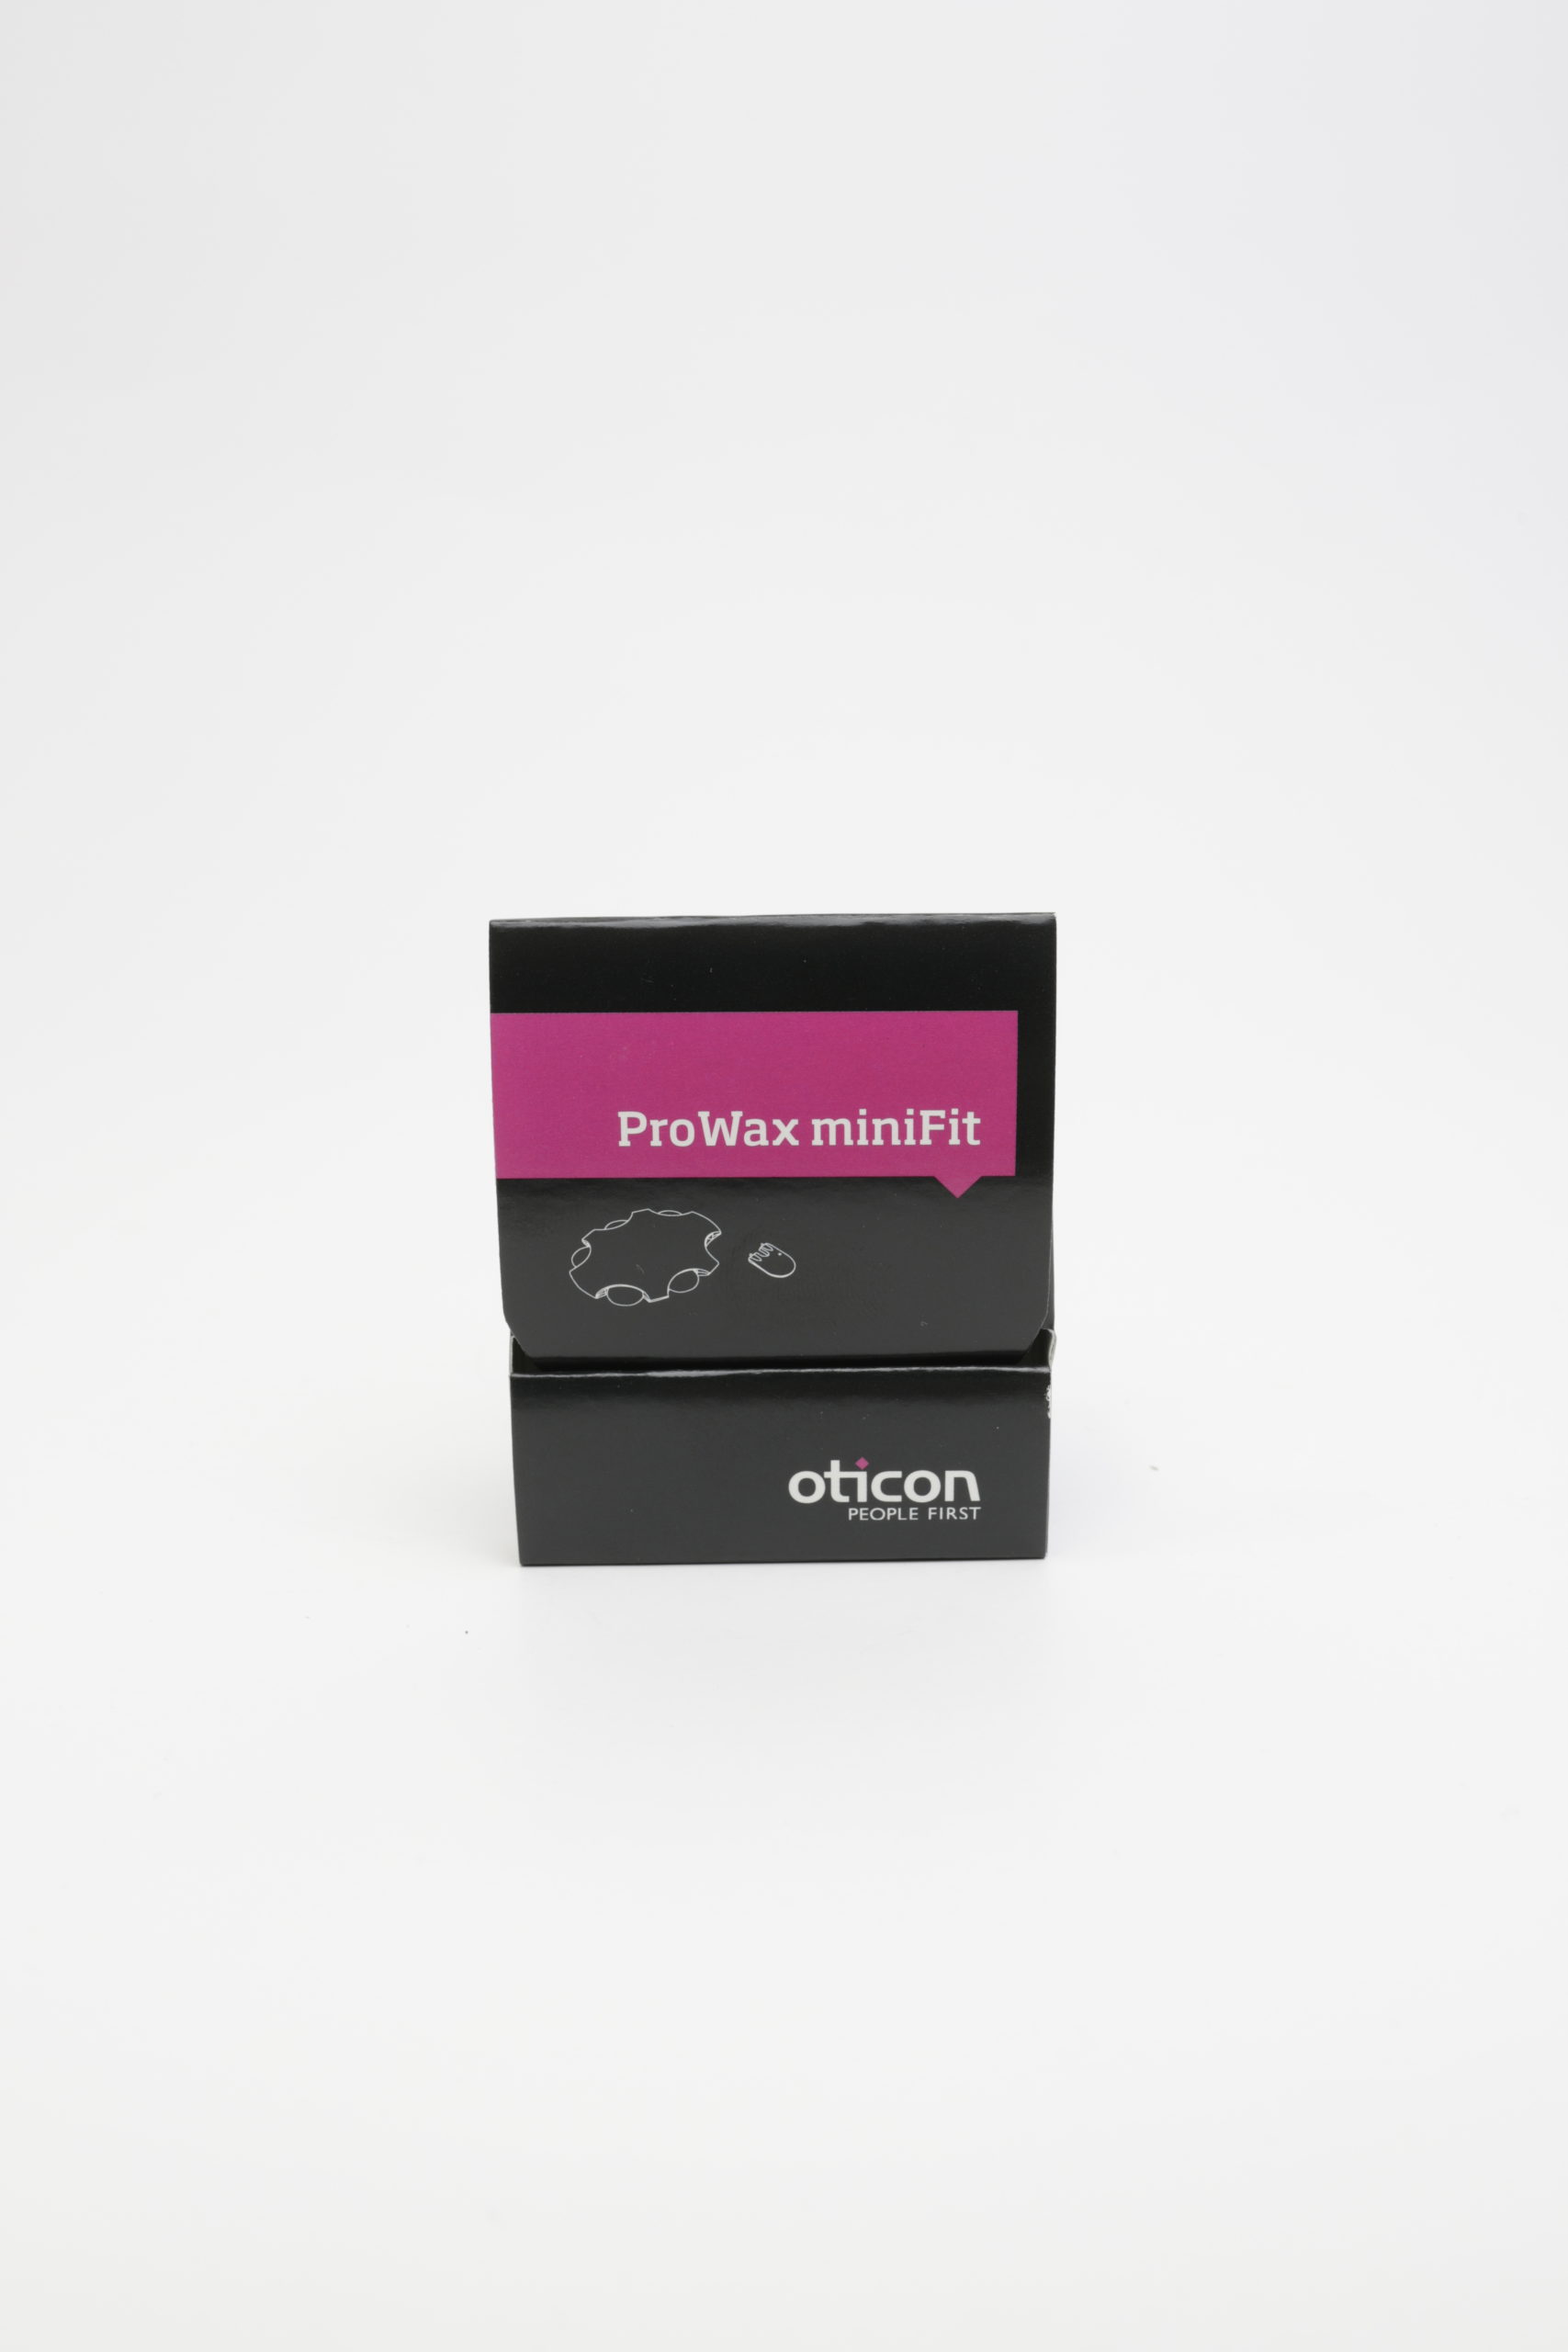 Oticon ProWax miniFit (6er-Pack)